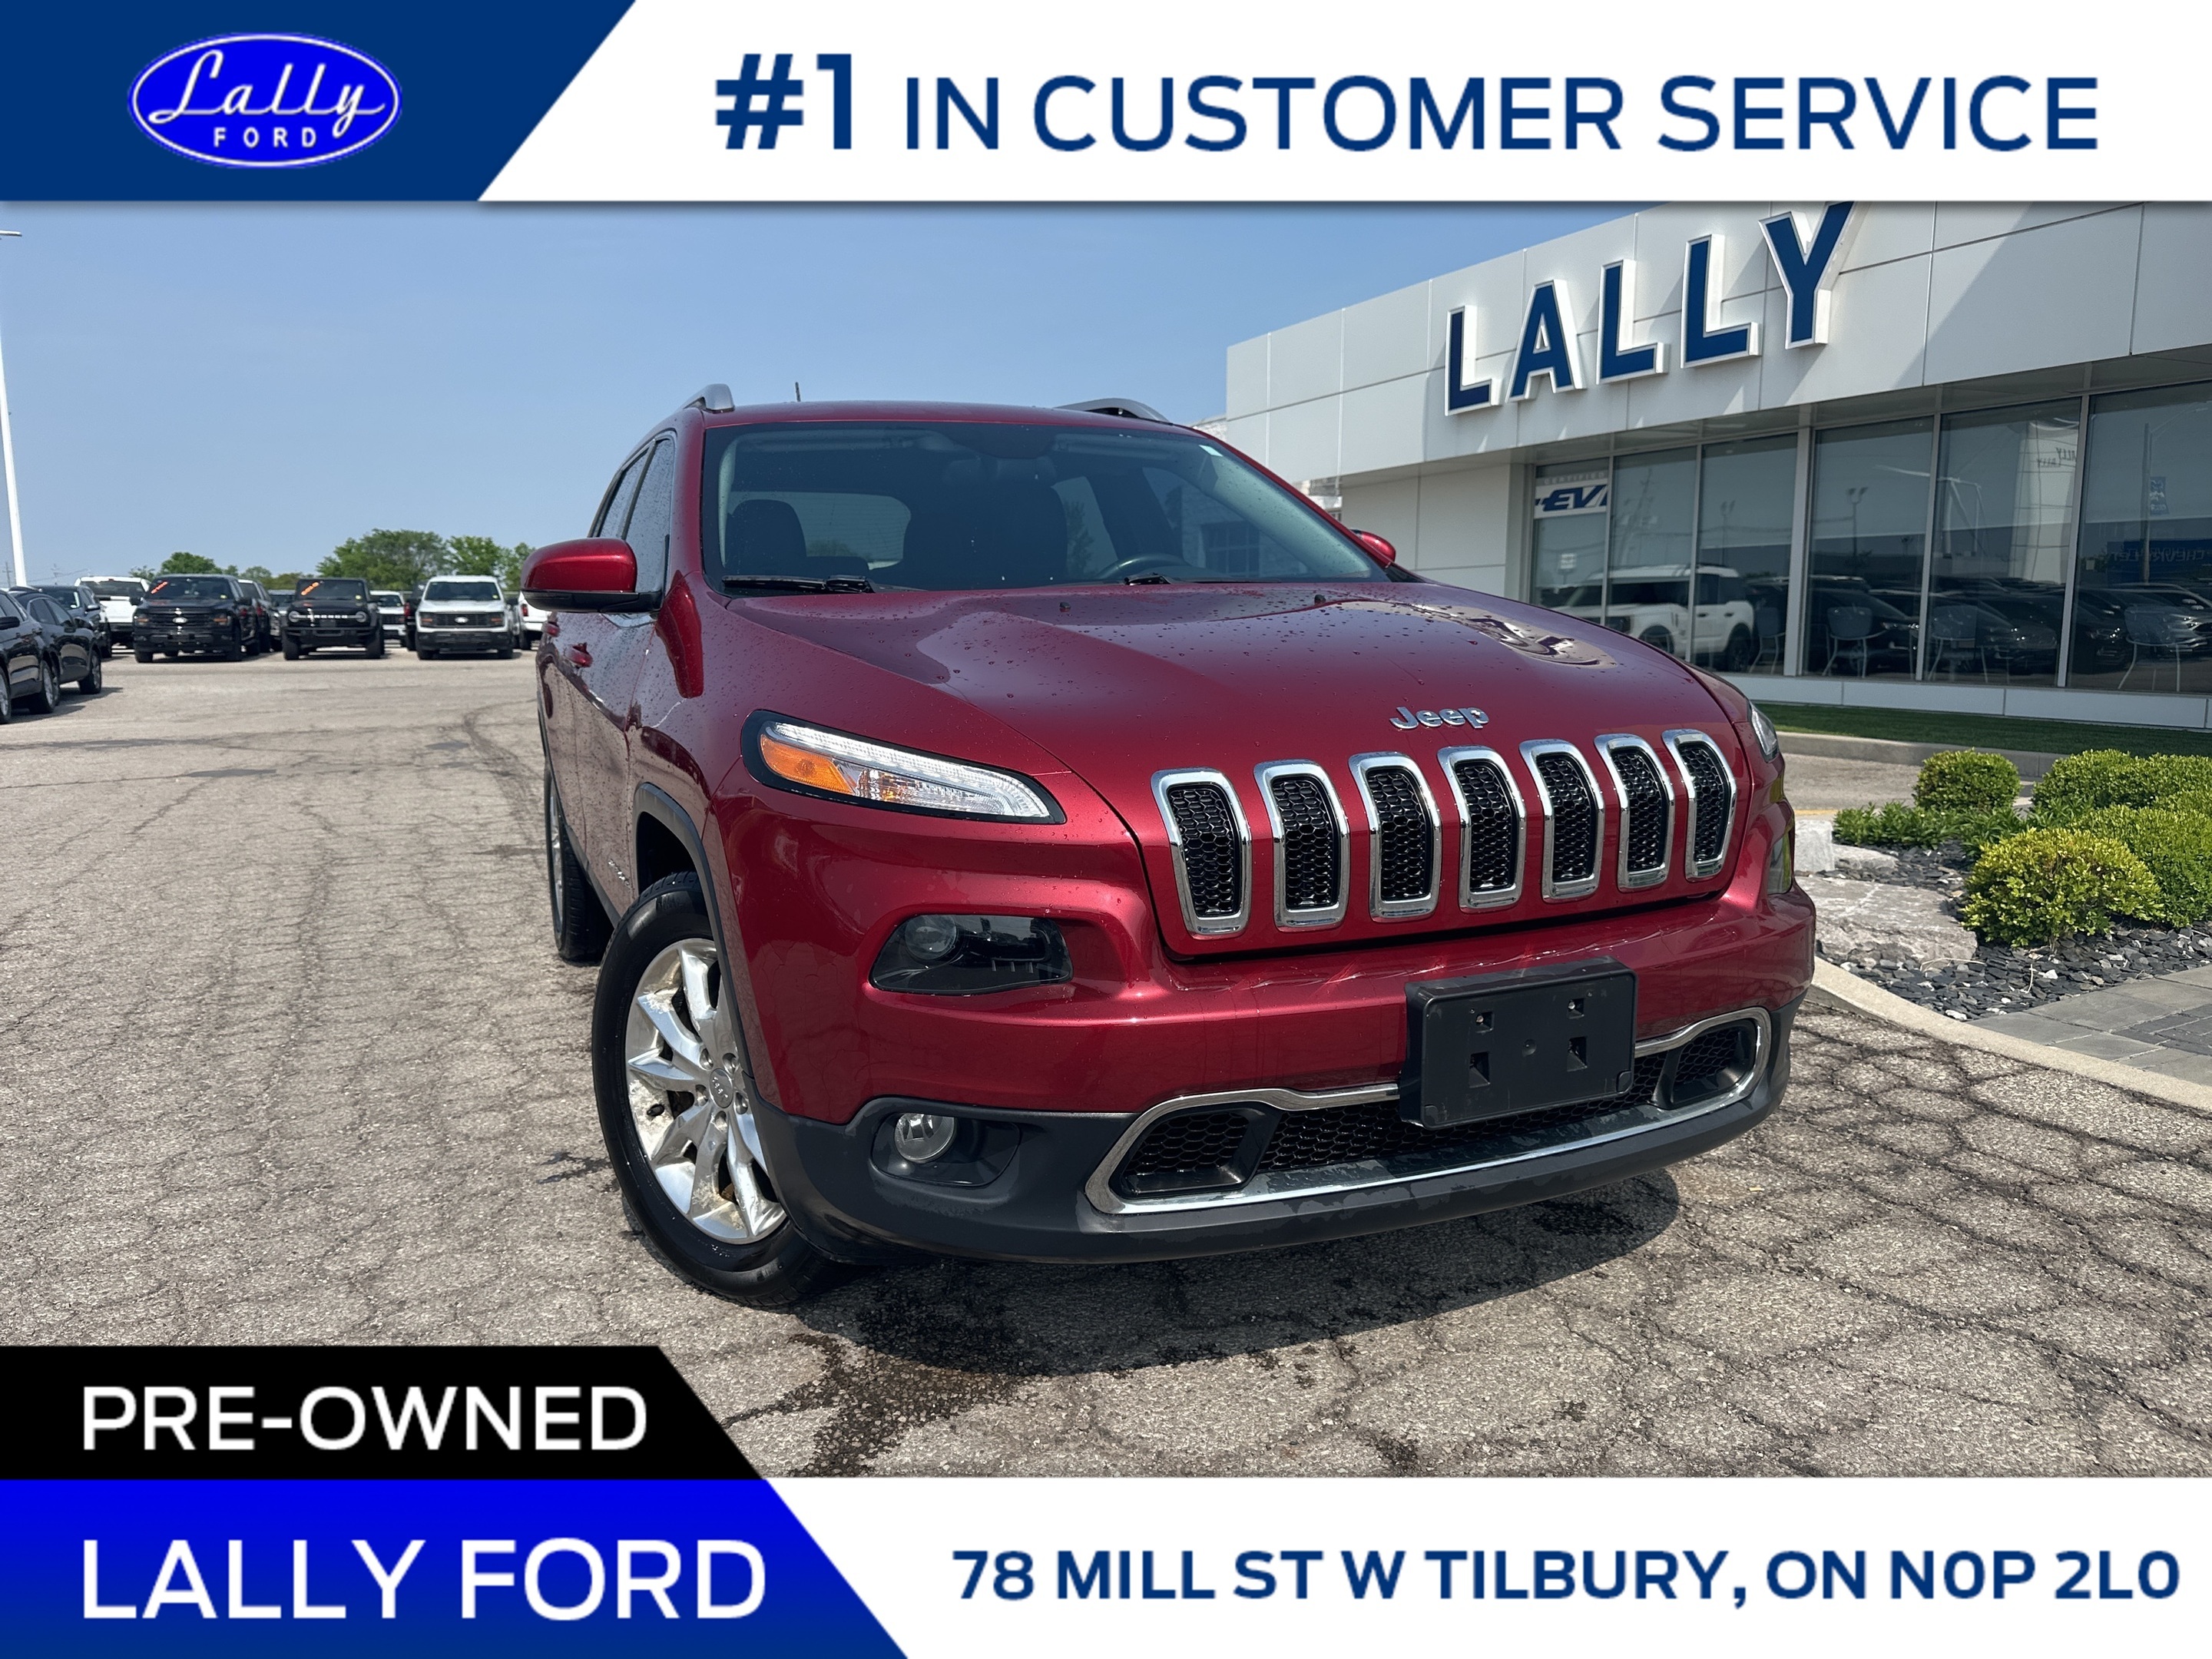 2016 Jeep Cherokee Limited, 4x4, Leather, Nav!!